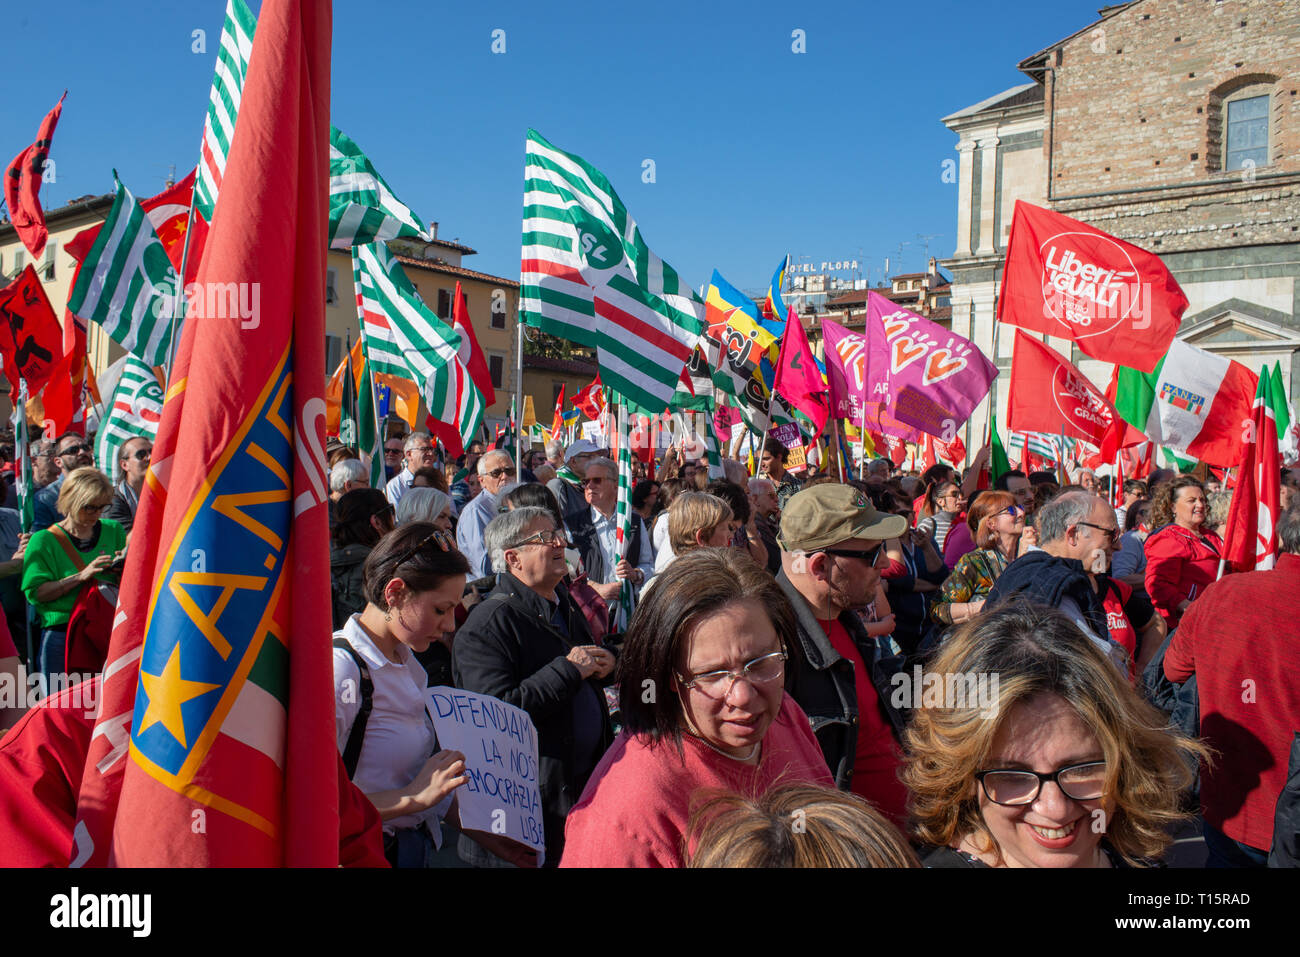 Prato, Italy. 23 March, 2019. Crowd at the anti-fascist counter-demonstration of the Italian left forces against the demonstration organized by Forza Nuova in Prato, Italy. Credit: Mario Carovani/Alamy Live News Stock Photo